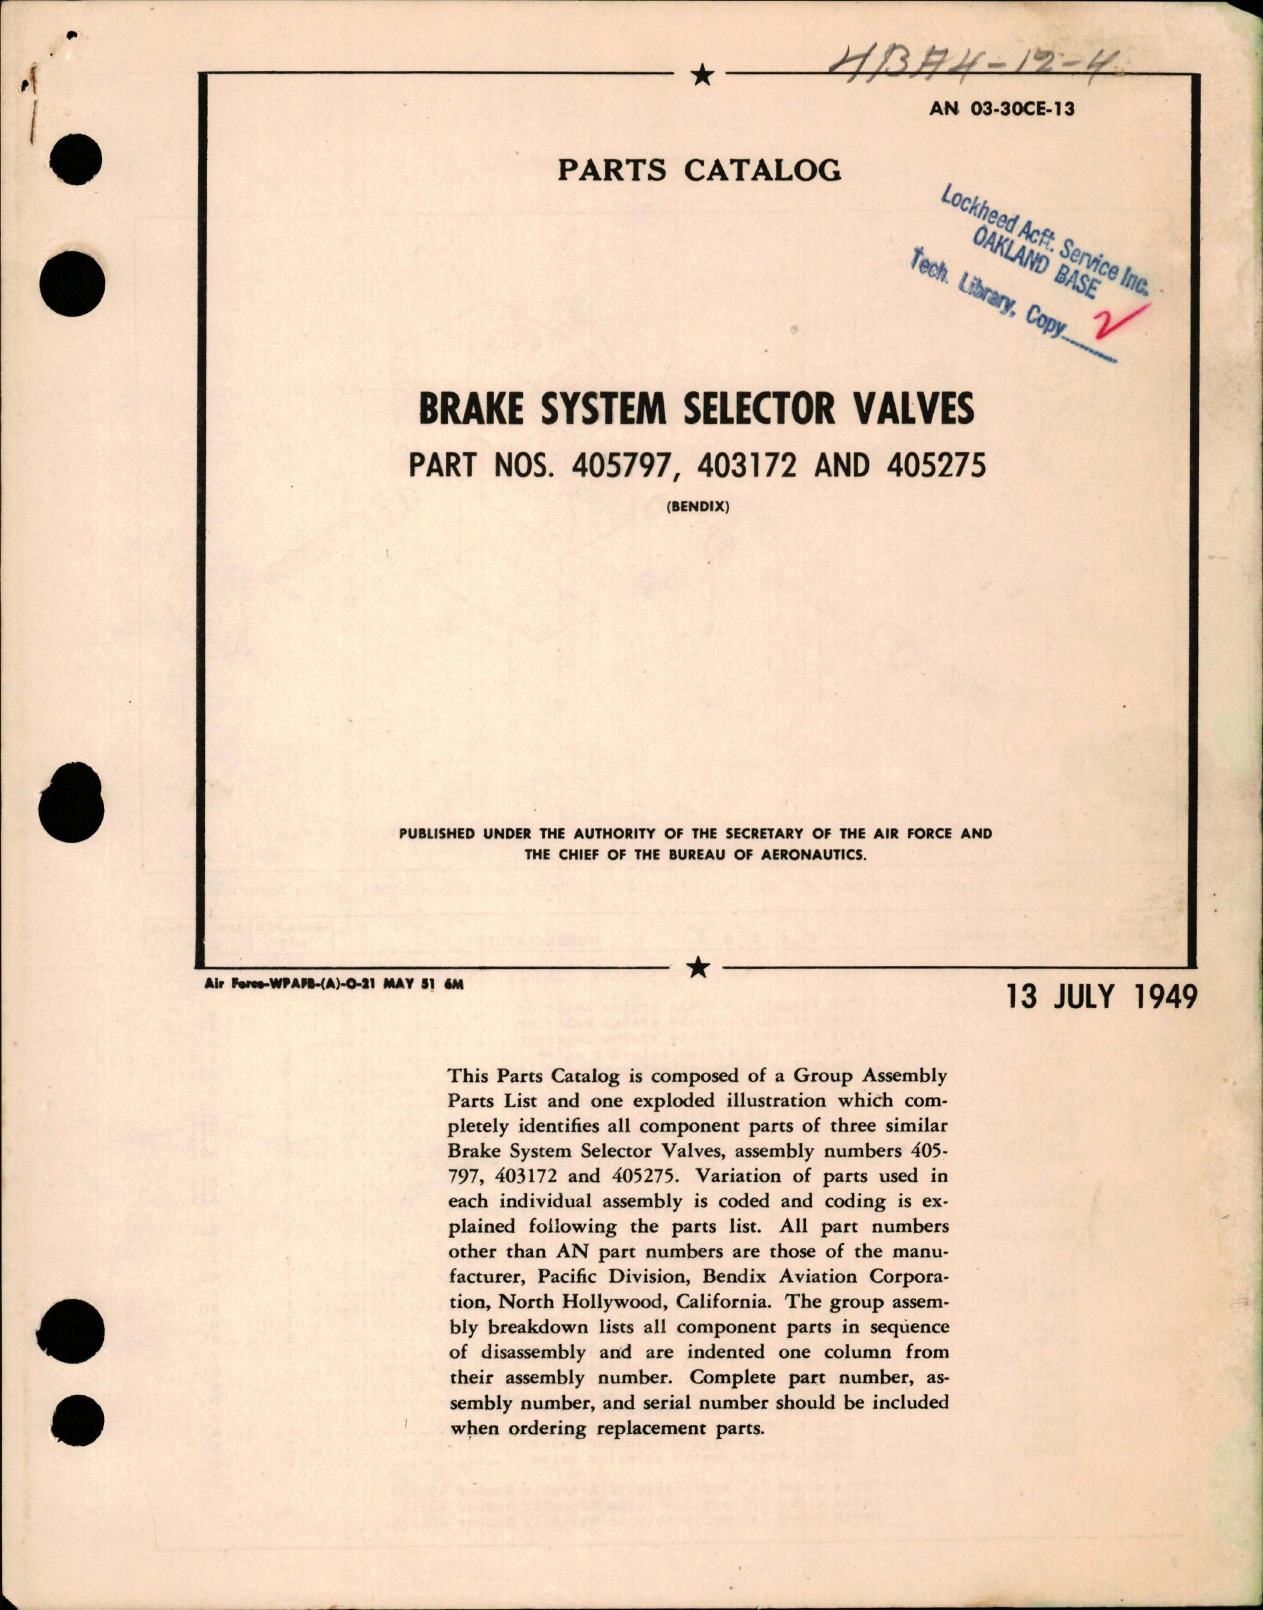 Sample page 1 from AirCorps Library document: Parts Catalog for Brake Selector Valves - Parts 405797, 403172, and 405275 